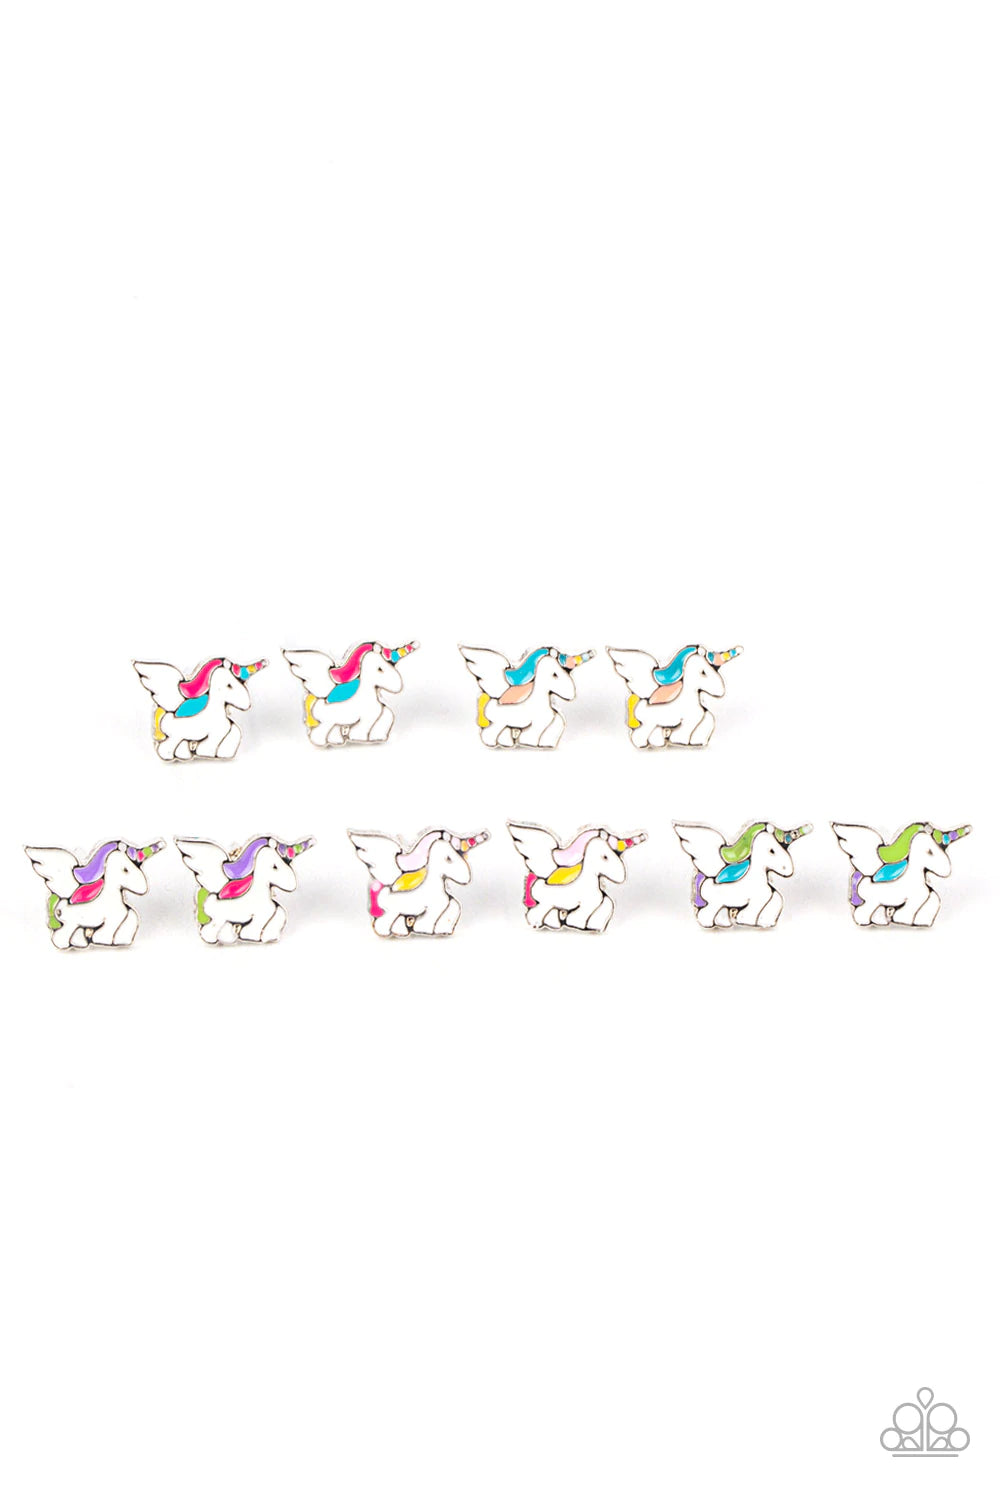 Paparazzi Accessories Starlet Shimmer Earrings #24 The multi-colored winged unicorn frames vary in shades of white, pink, purple, yellow, green, and orange accents. Earrings attach to standard post fittings. Jewelry